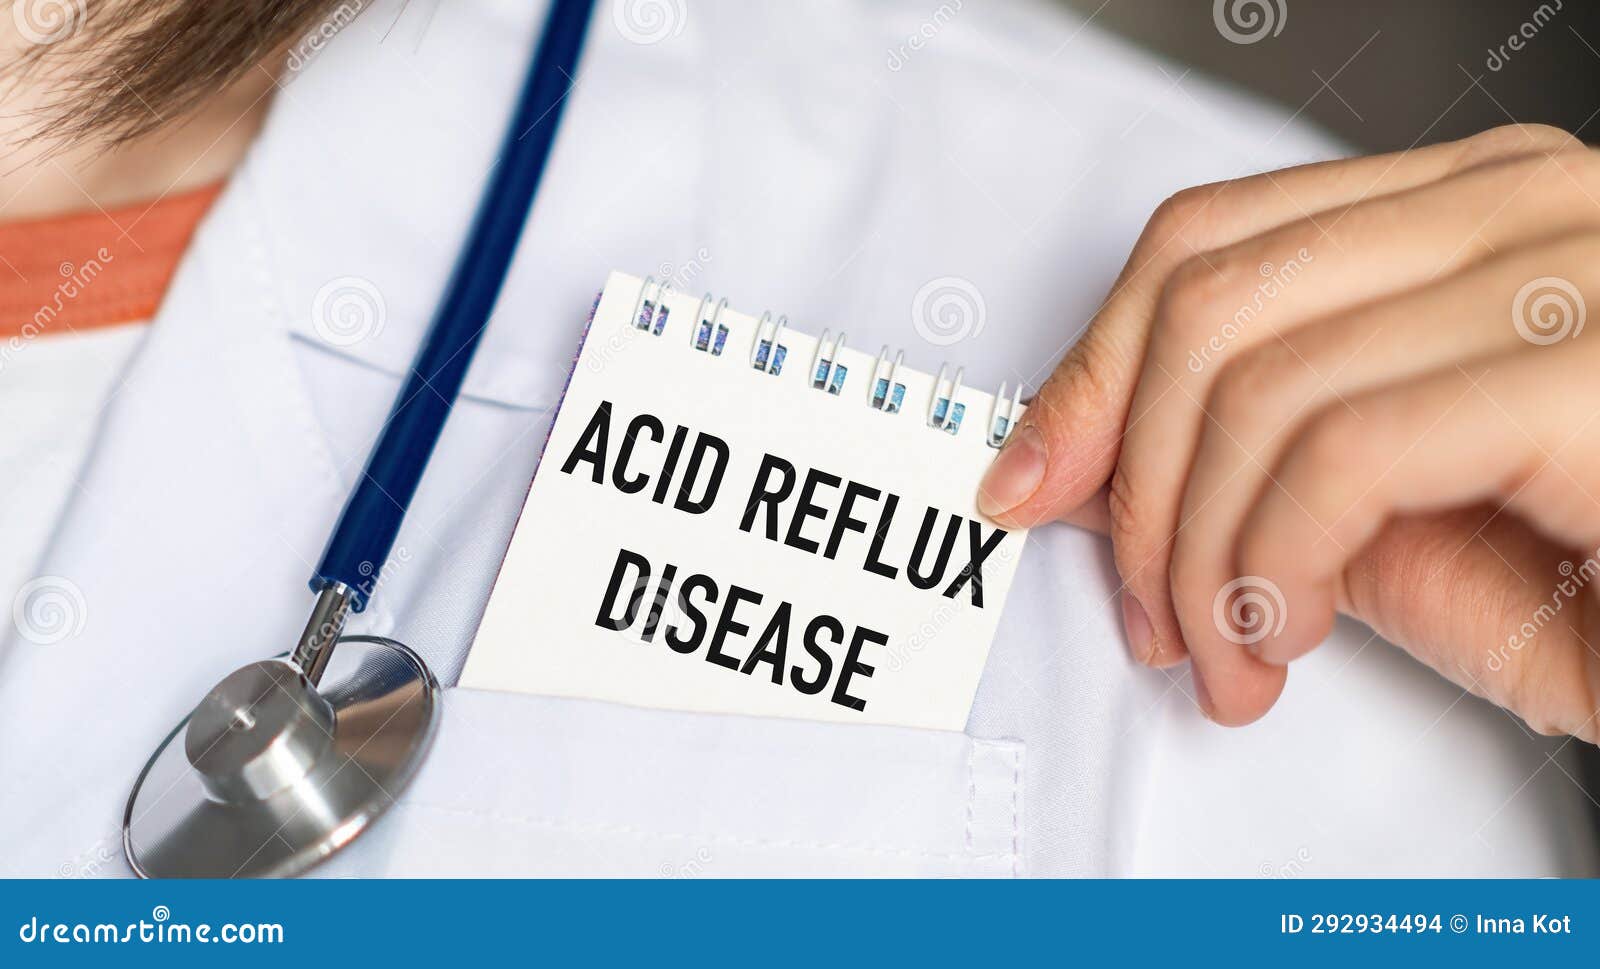 How Acid Reflux Can Affect Your Throat | Raleigh Capitol Ear, Nose & Throat